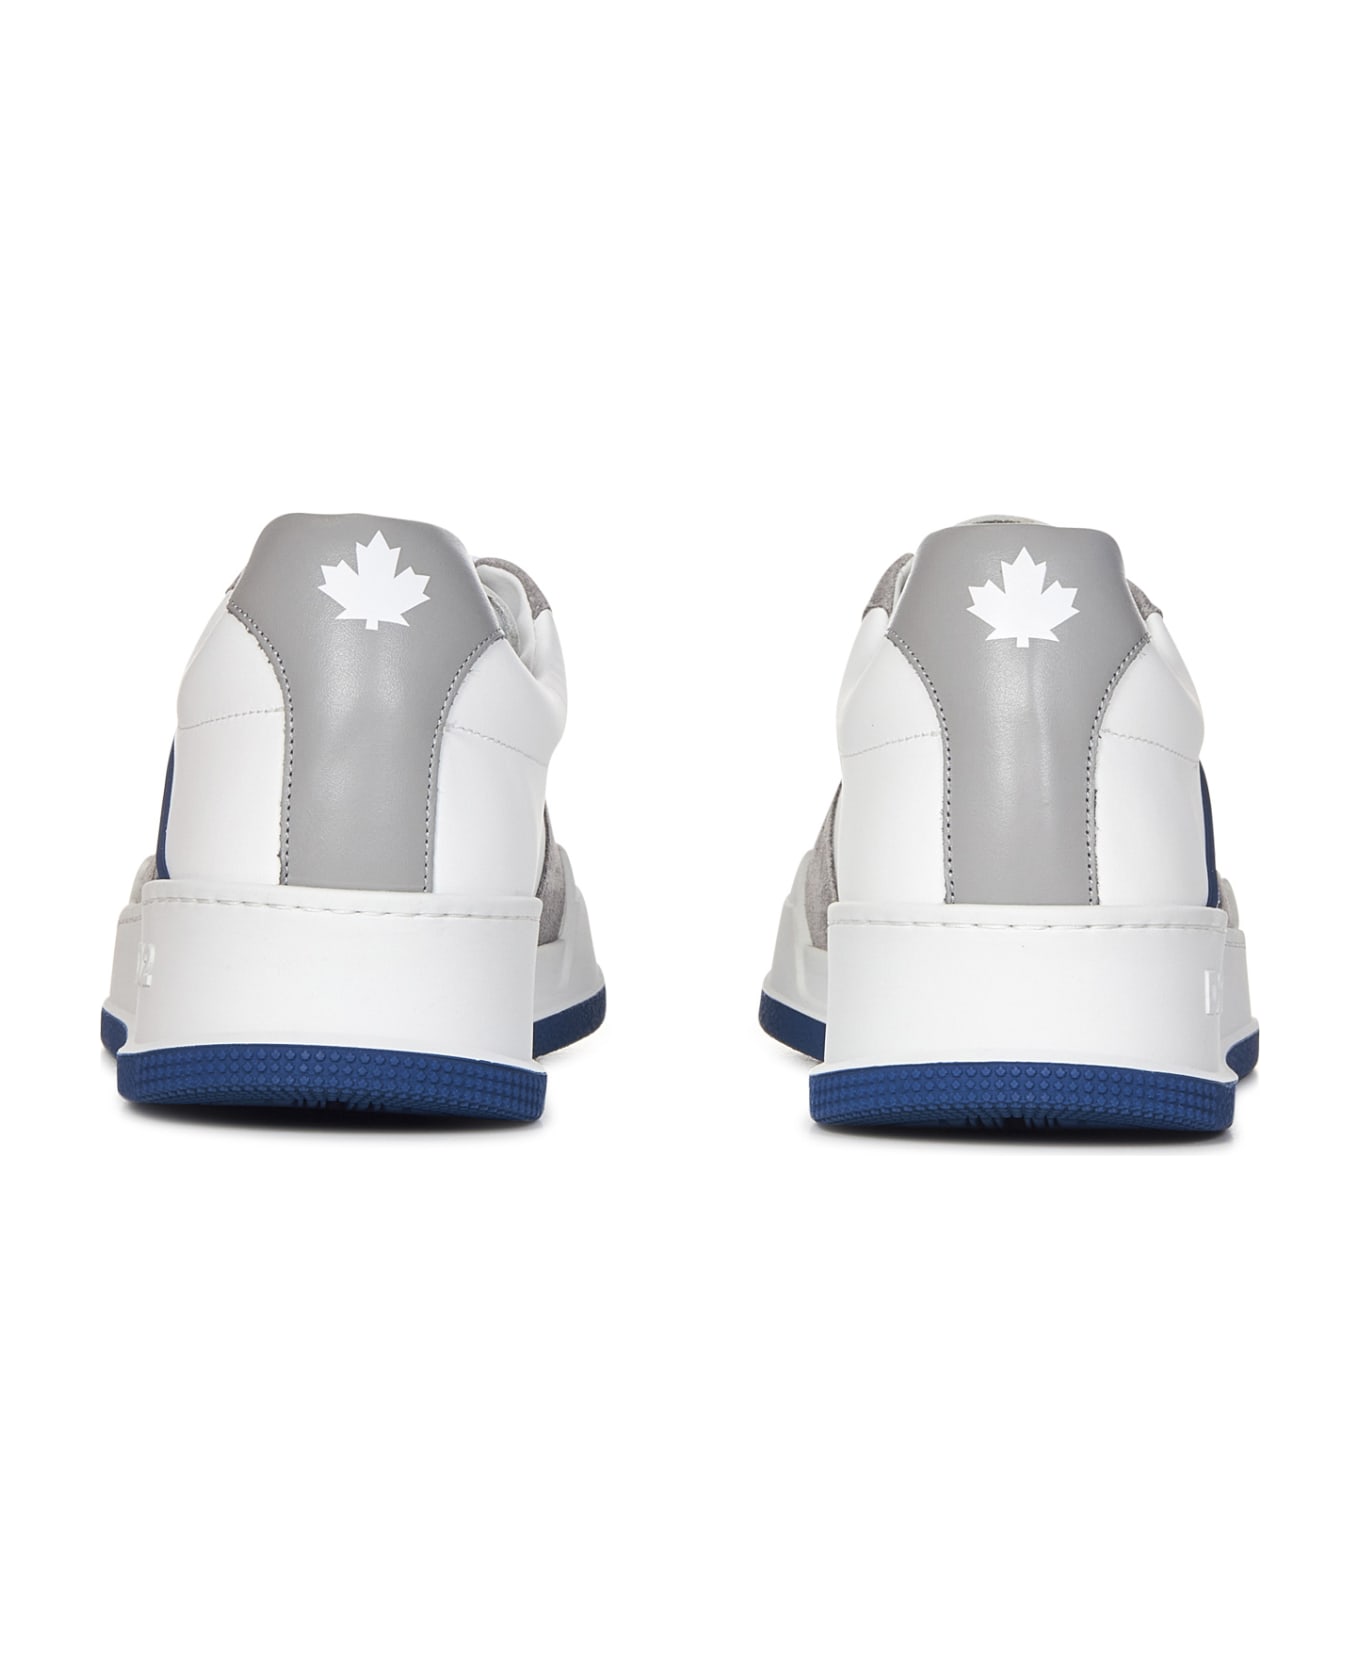 Dsquared2 Canadian Sneakers - White